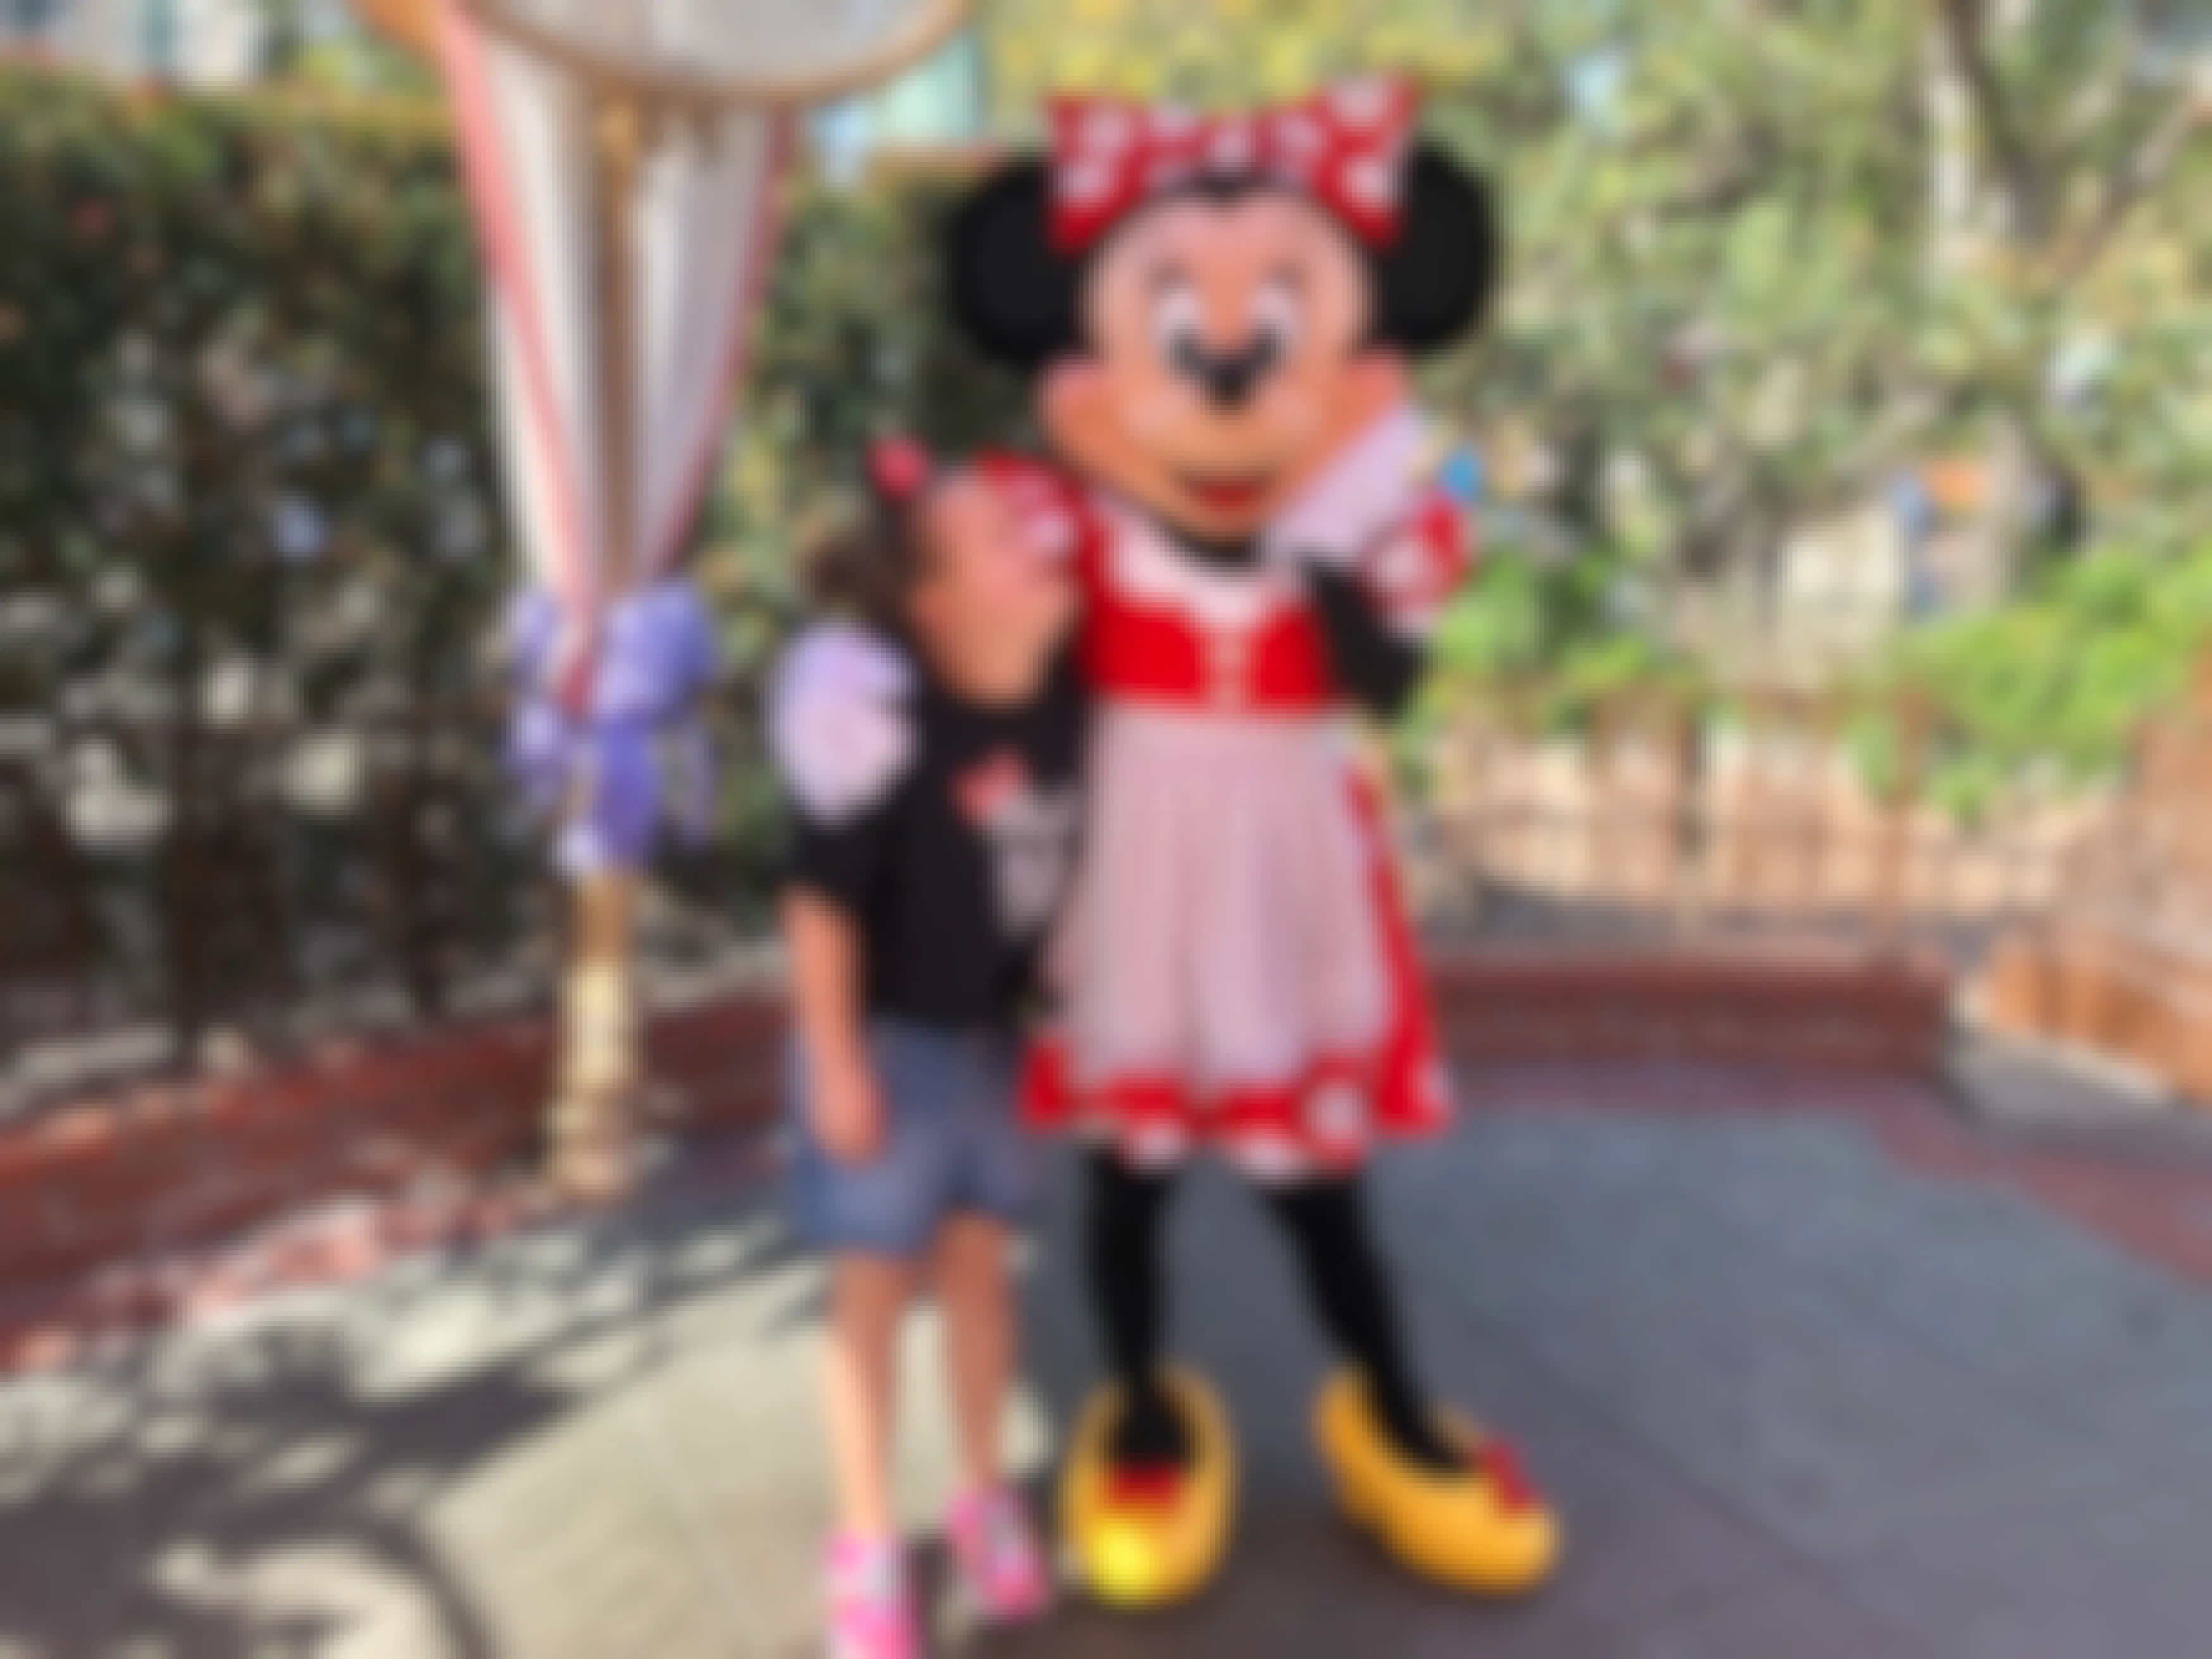 A little girl poses with Minnie Mouse at Disneyland.